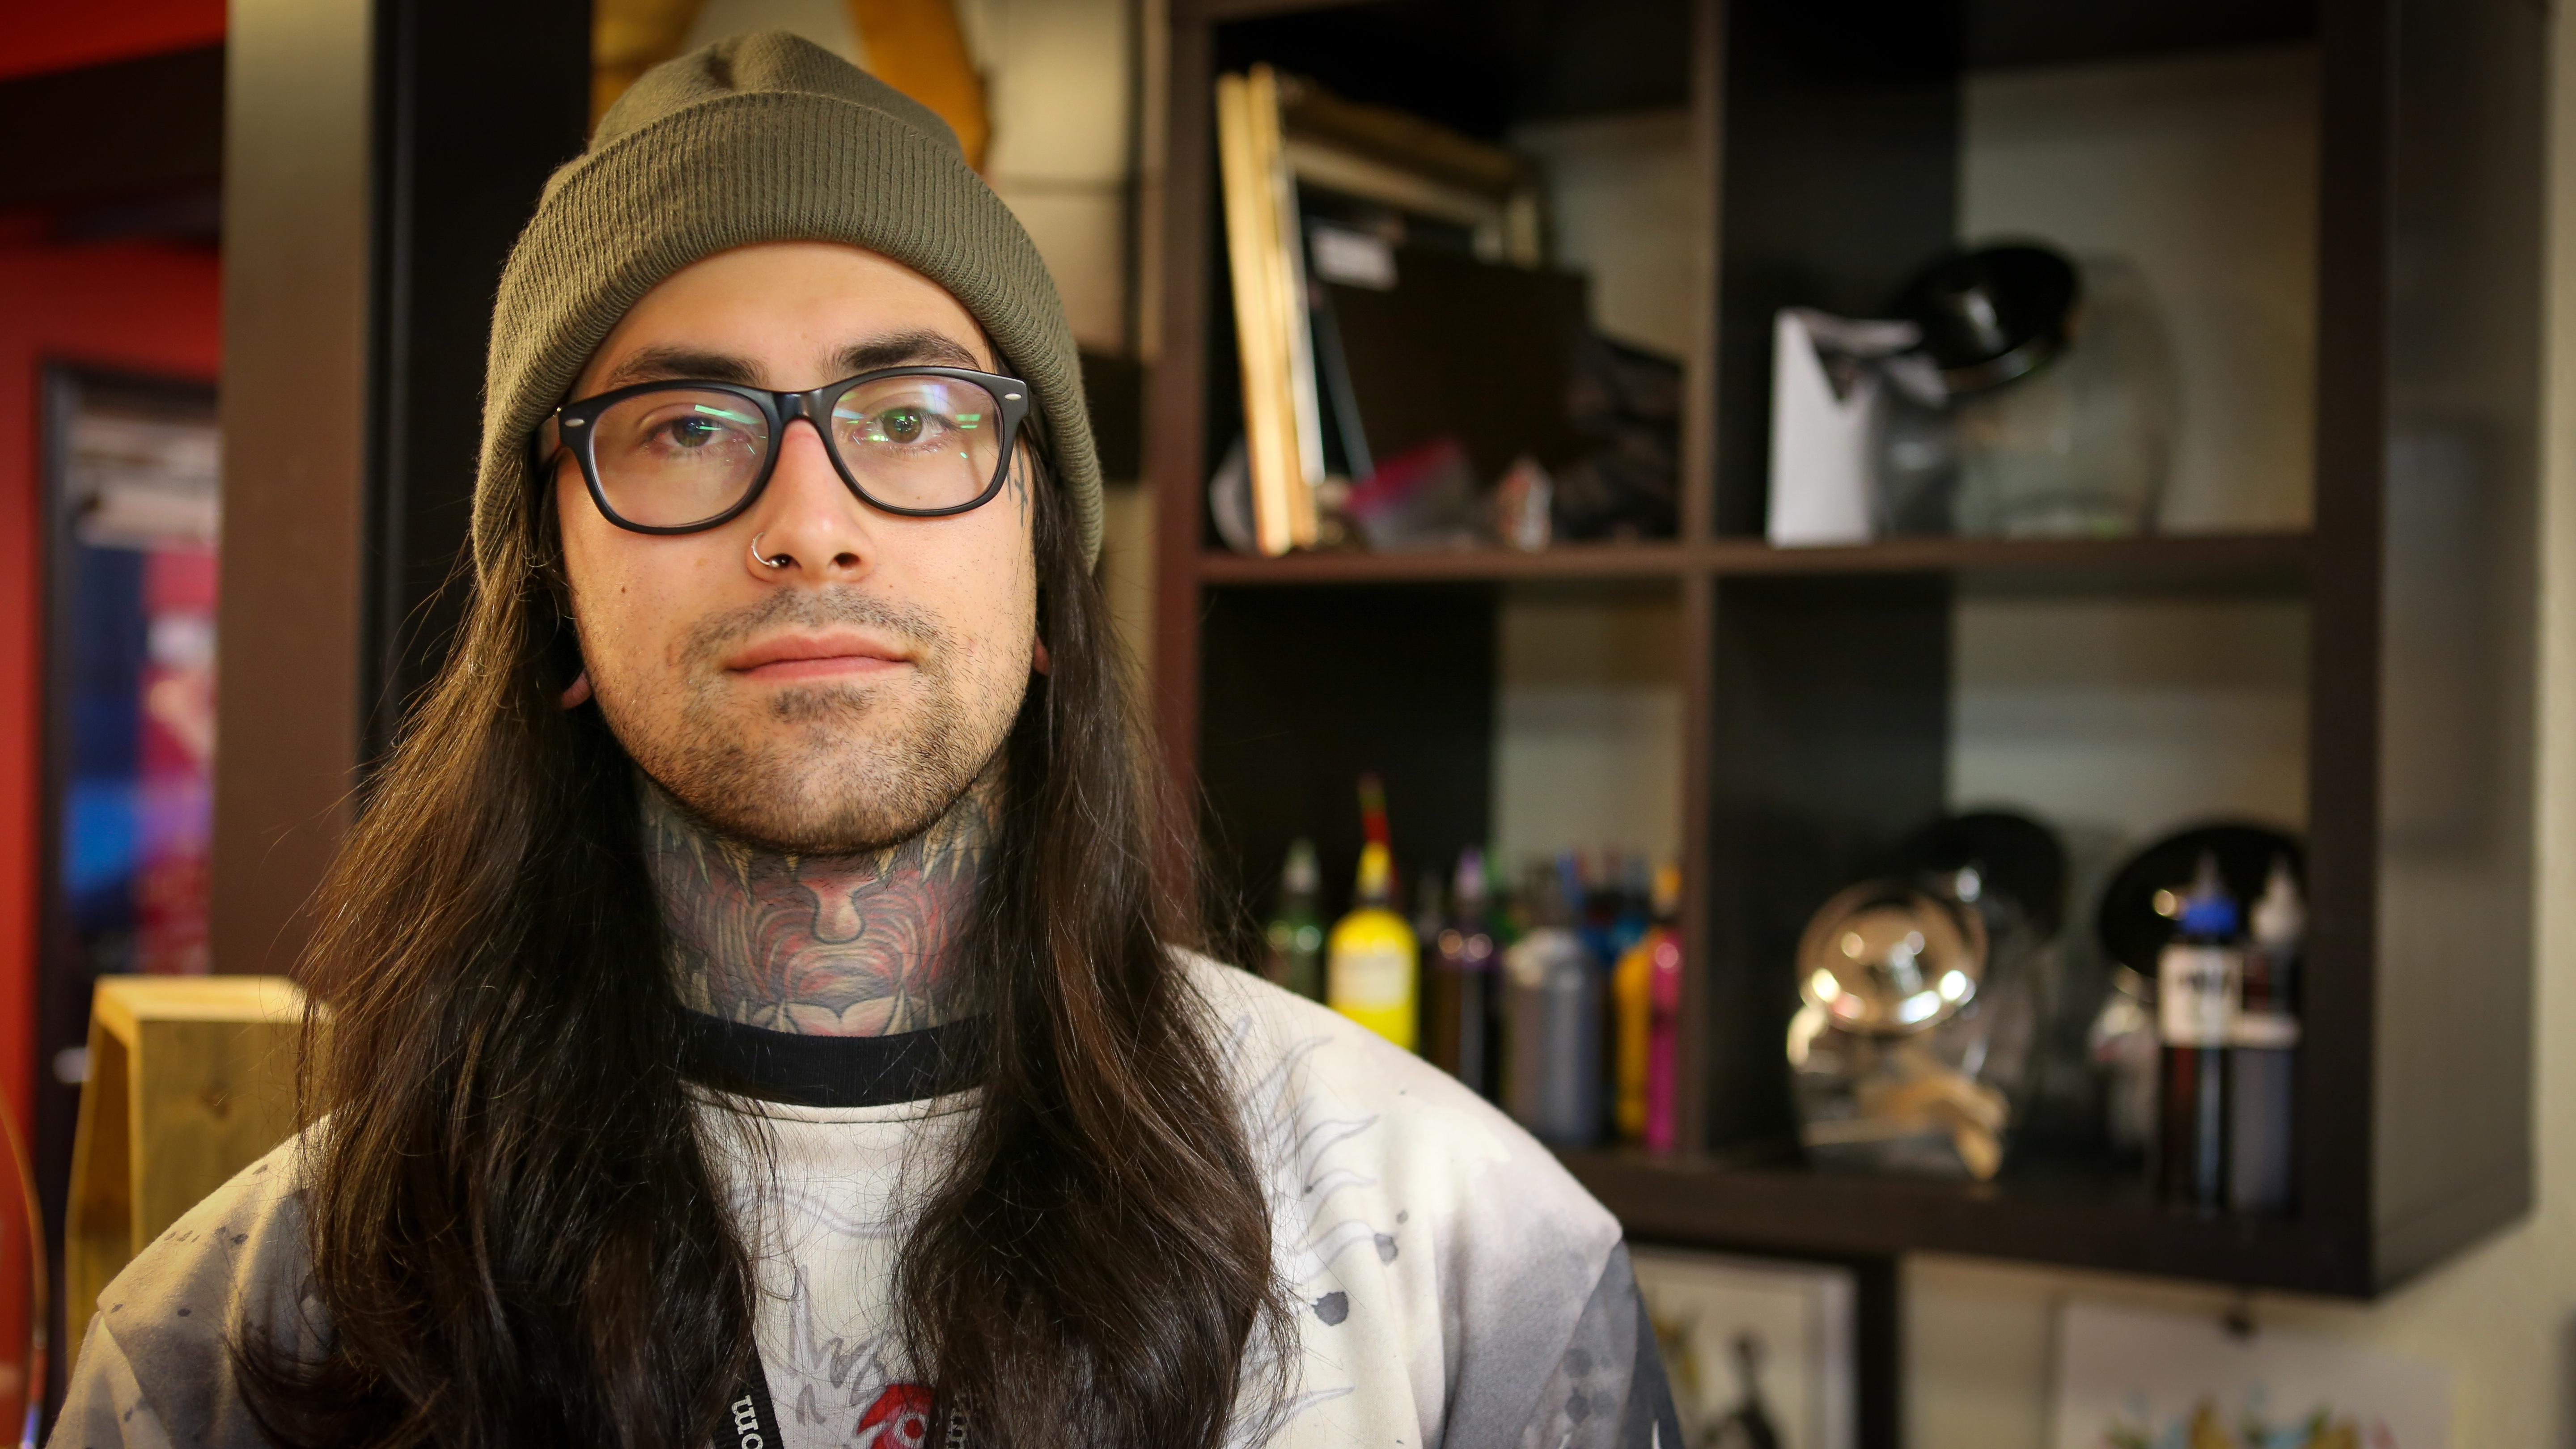 Portland Tattoo Artist Competing In Reality Show 'Ink Master' - OPB